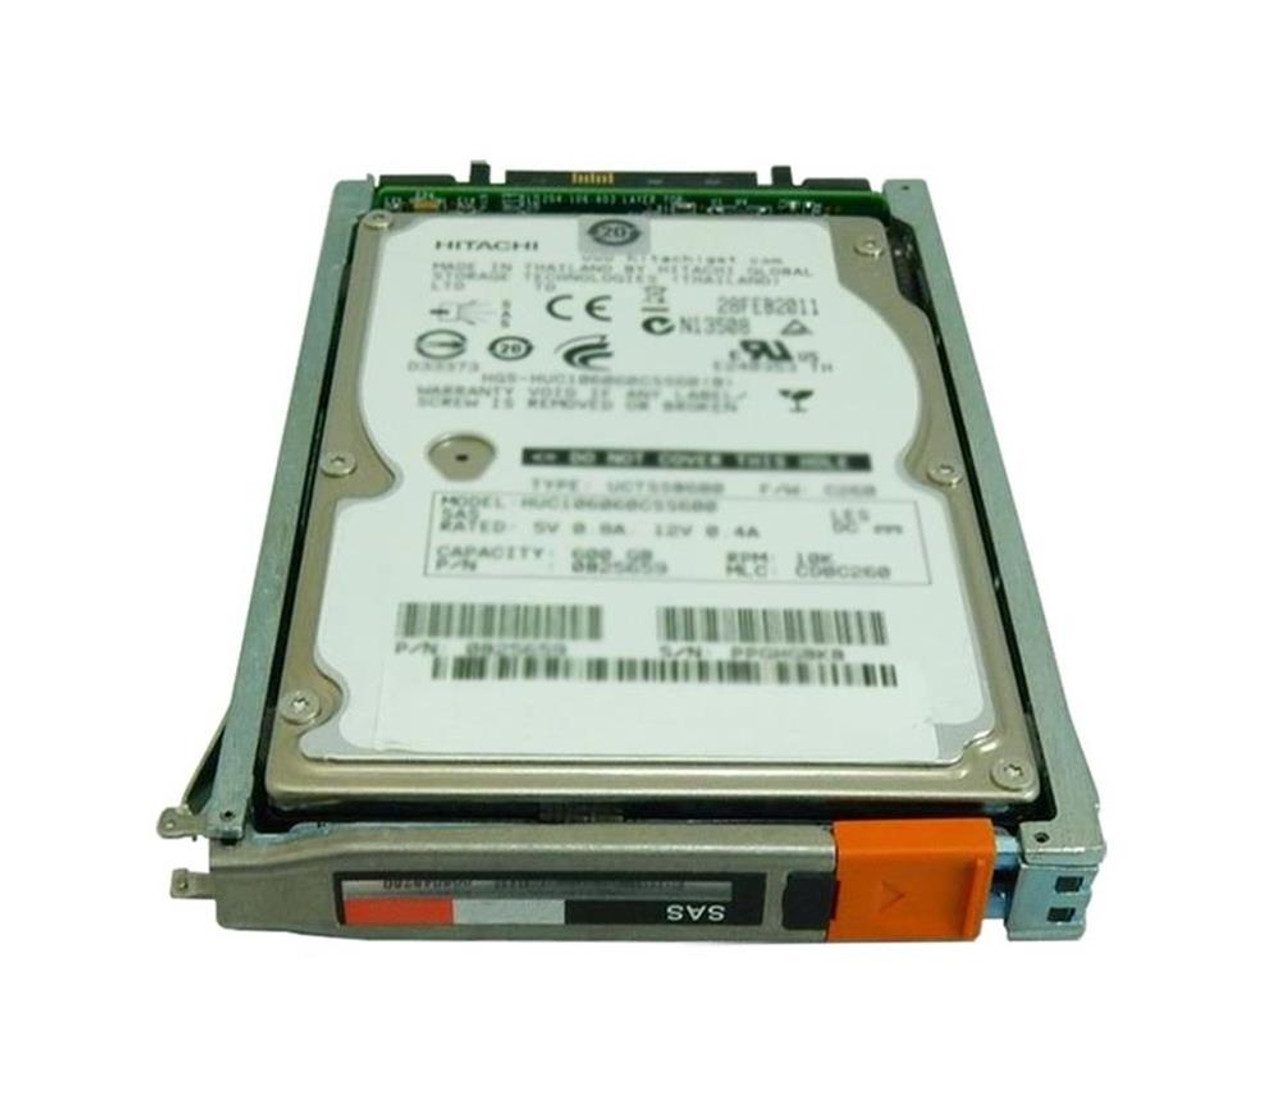 D3-2S12FX-1600U EMC Unity 1.6TB 2.5-inch Internal Solid State Drive (SSD) for FAST VP 25 x 2.5-inch Enclosure